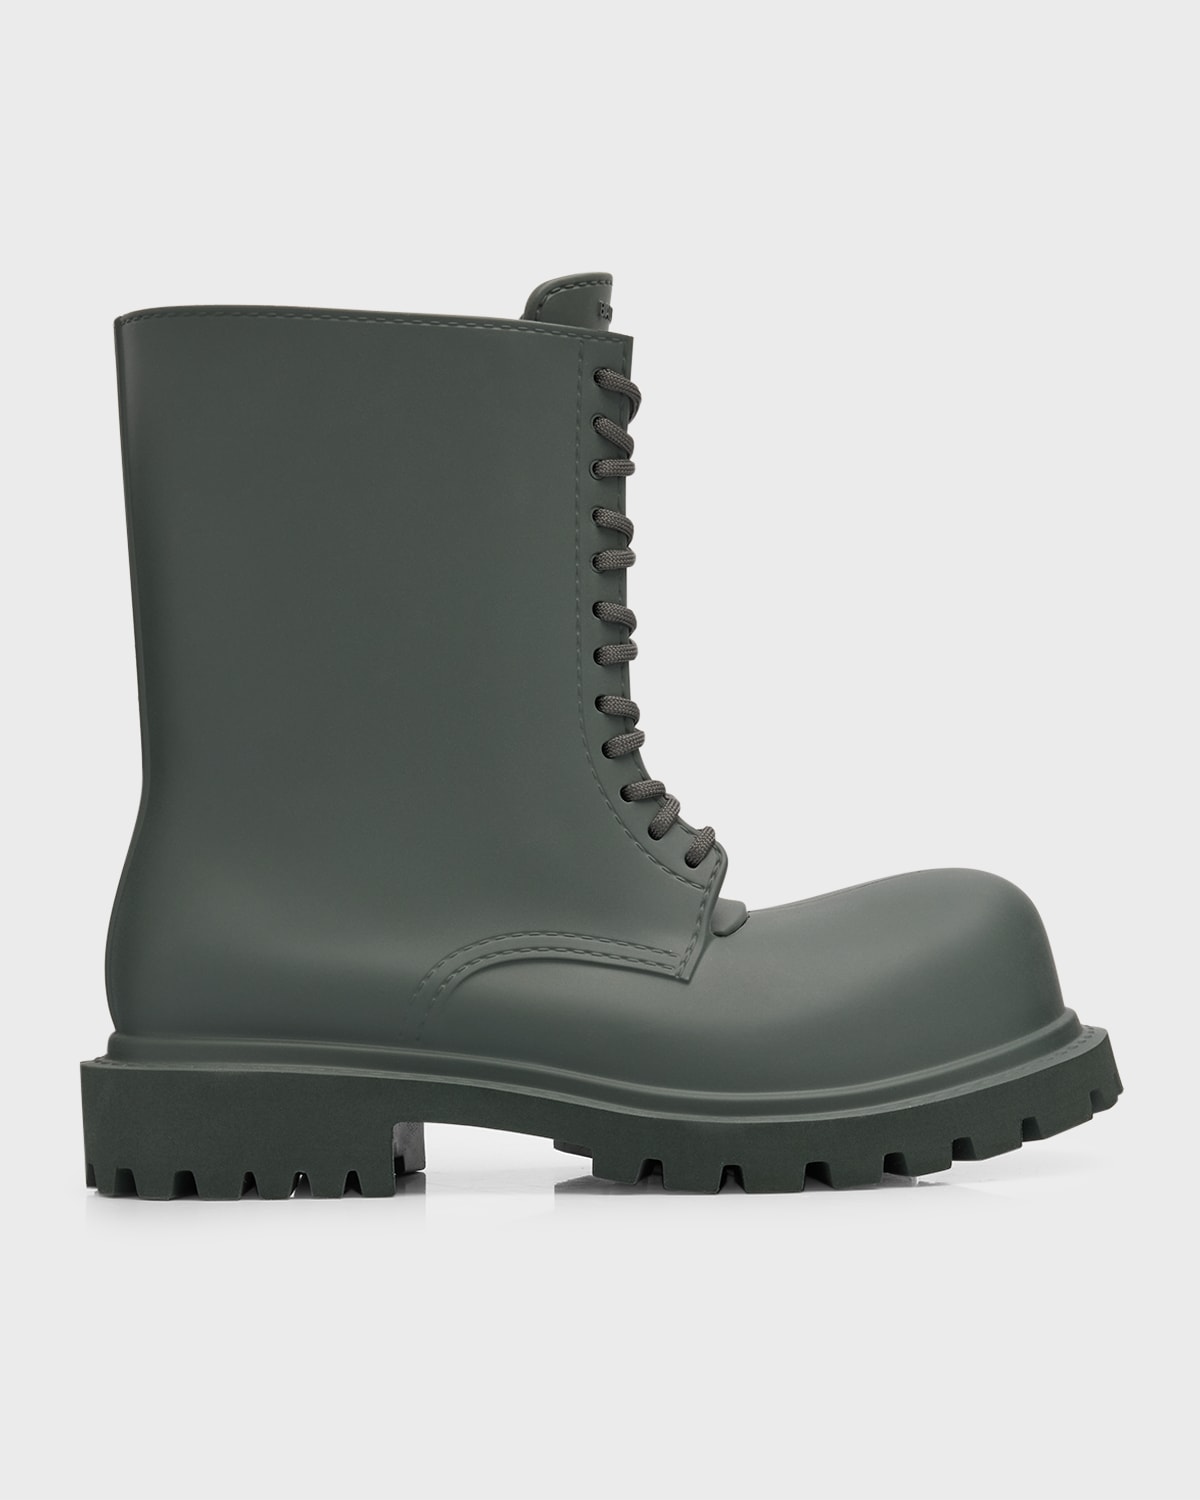 BALENCIAGA MEN'S OVERSIZED LEATHER ARMY BOOTS